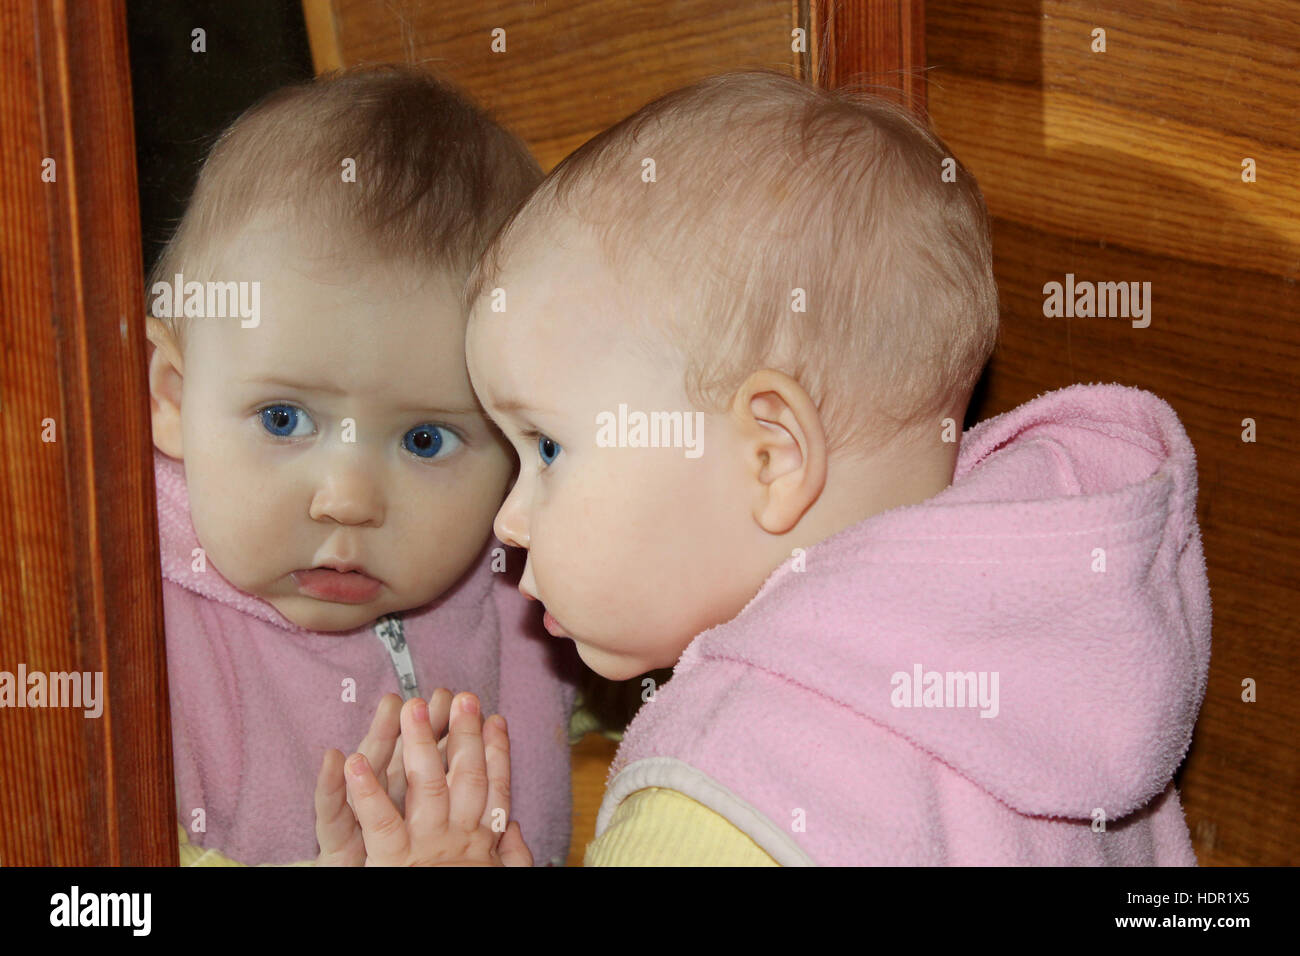 amusing baby looks at herself in front of mirror Stock Photo